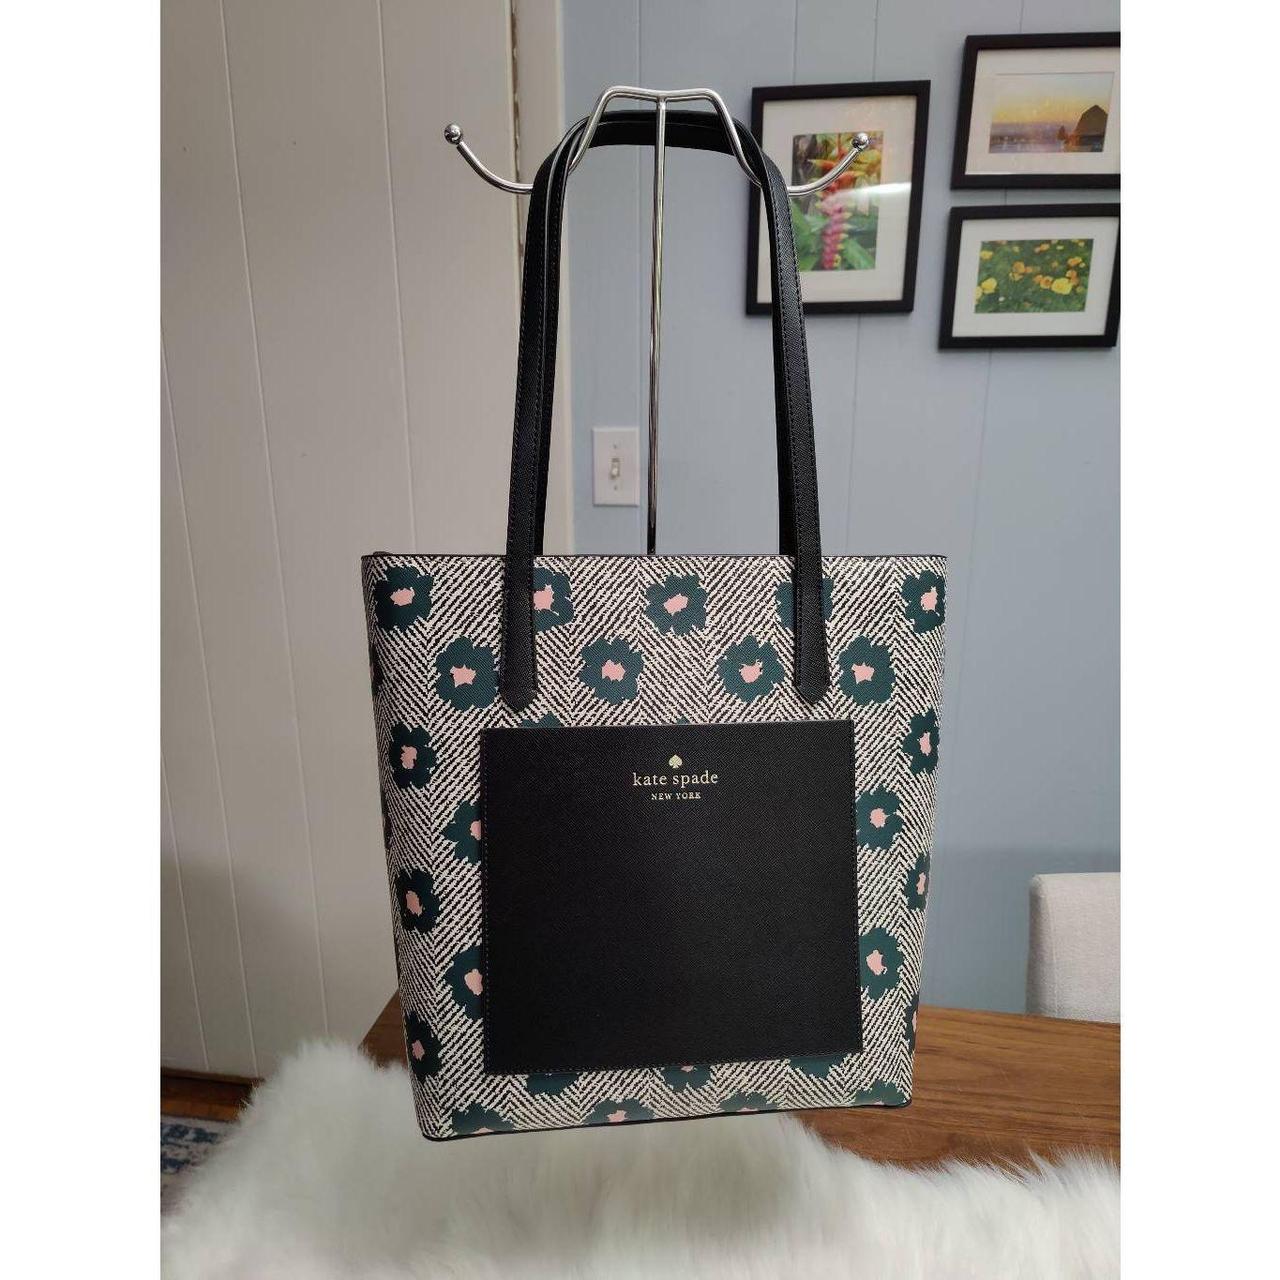 NWT KATE SPADE Daily Tote Shoulder Bag Colorblock Peacock Saffiano Leather  | eBay